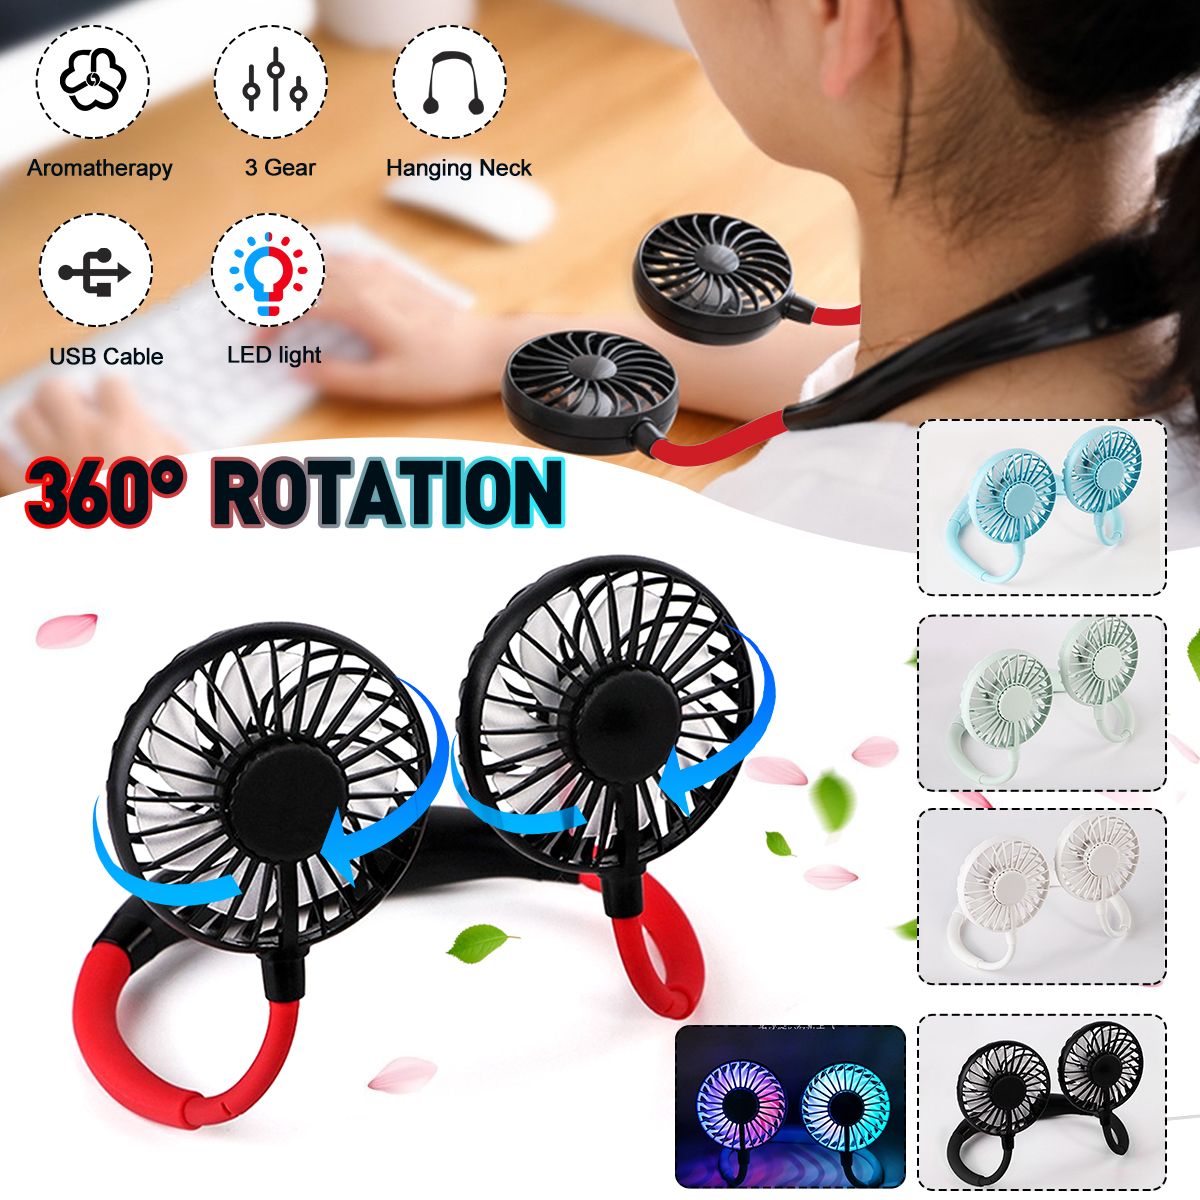 1200mah-3-Gear-LED-USB-Rechargeable-Portable-Hanging-Neck-Fan-Rechargeable-Aromatherapy-Cooling-Fan--1716094